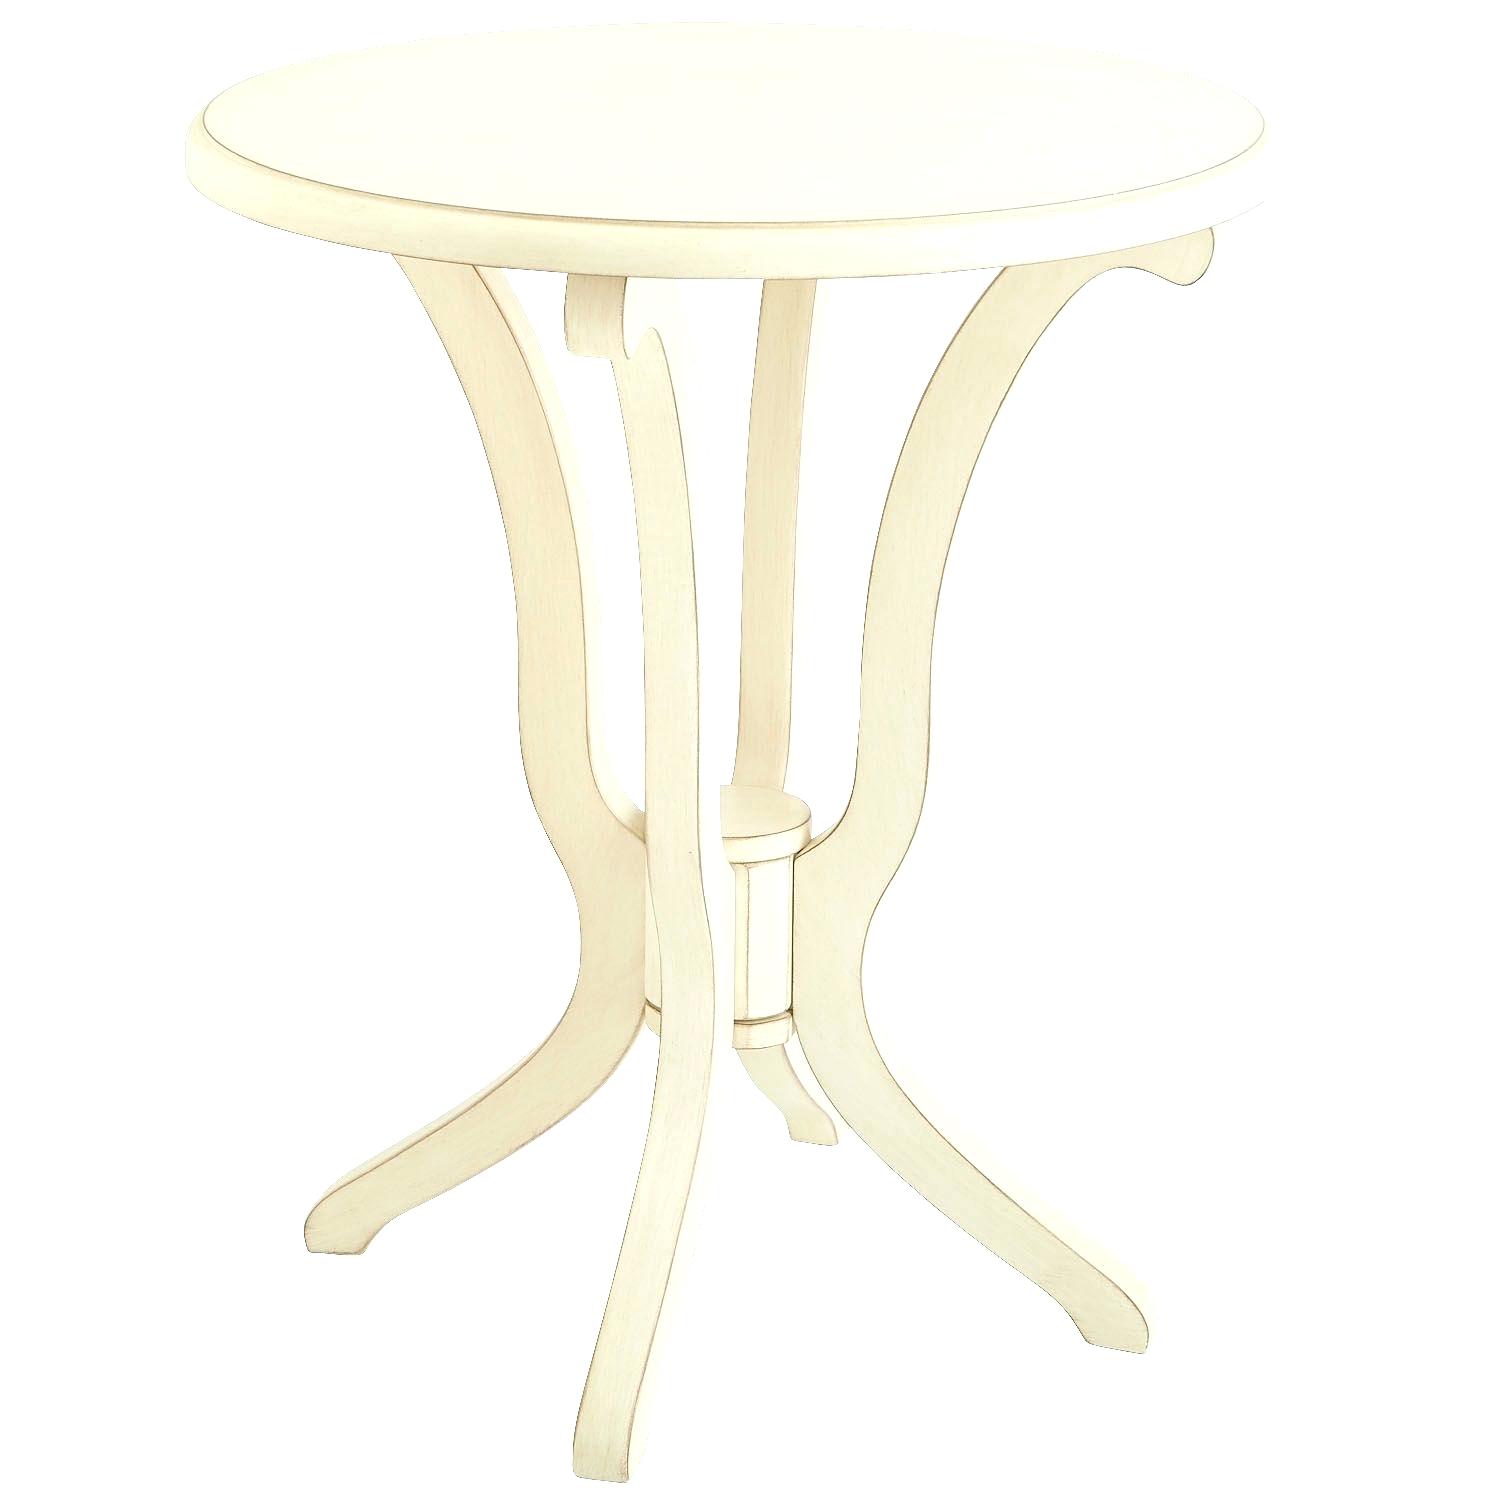 starburst mosaic accent table pier imports living tables outdoor daffodil antique white zoom mirrored small glass top coffee large black clock cool retro furniture wood tall